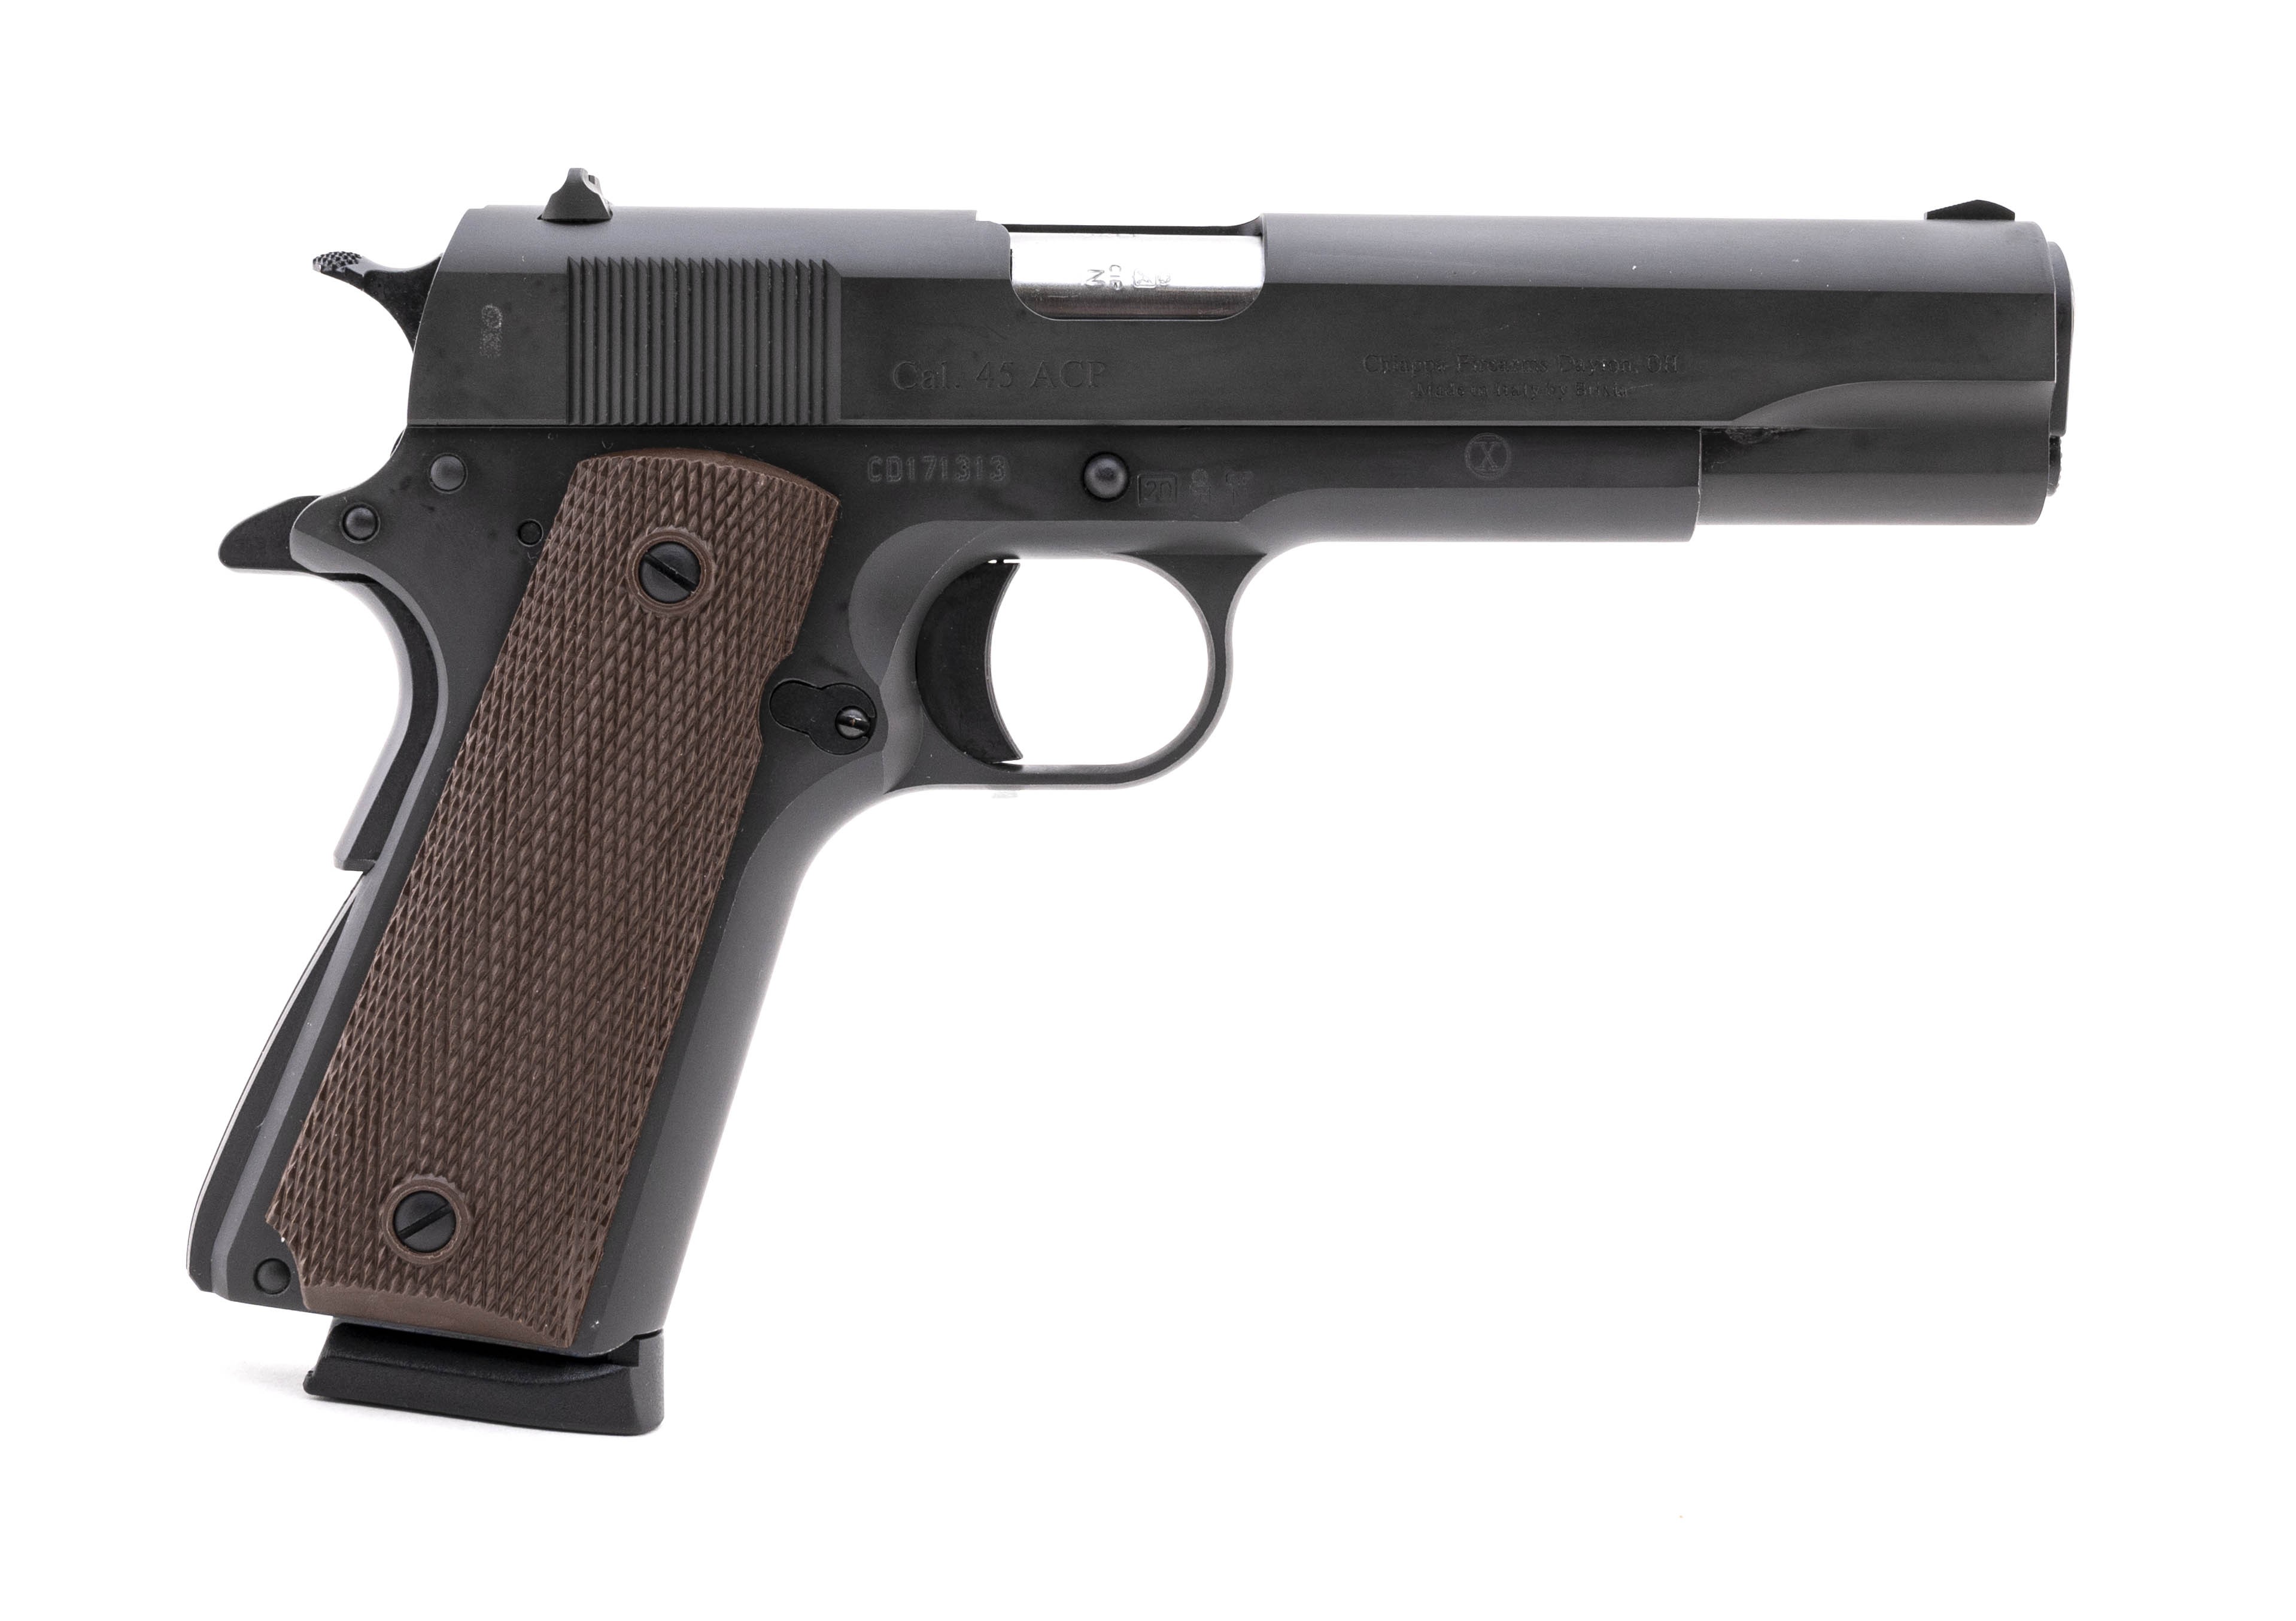 Chiappa/Charles Daly 1911 .45 ACP caliber pistol for sale.